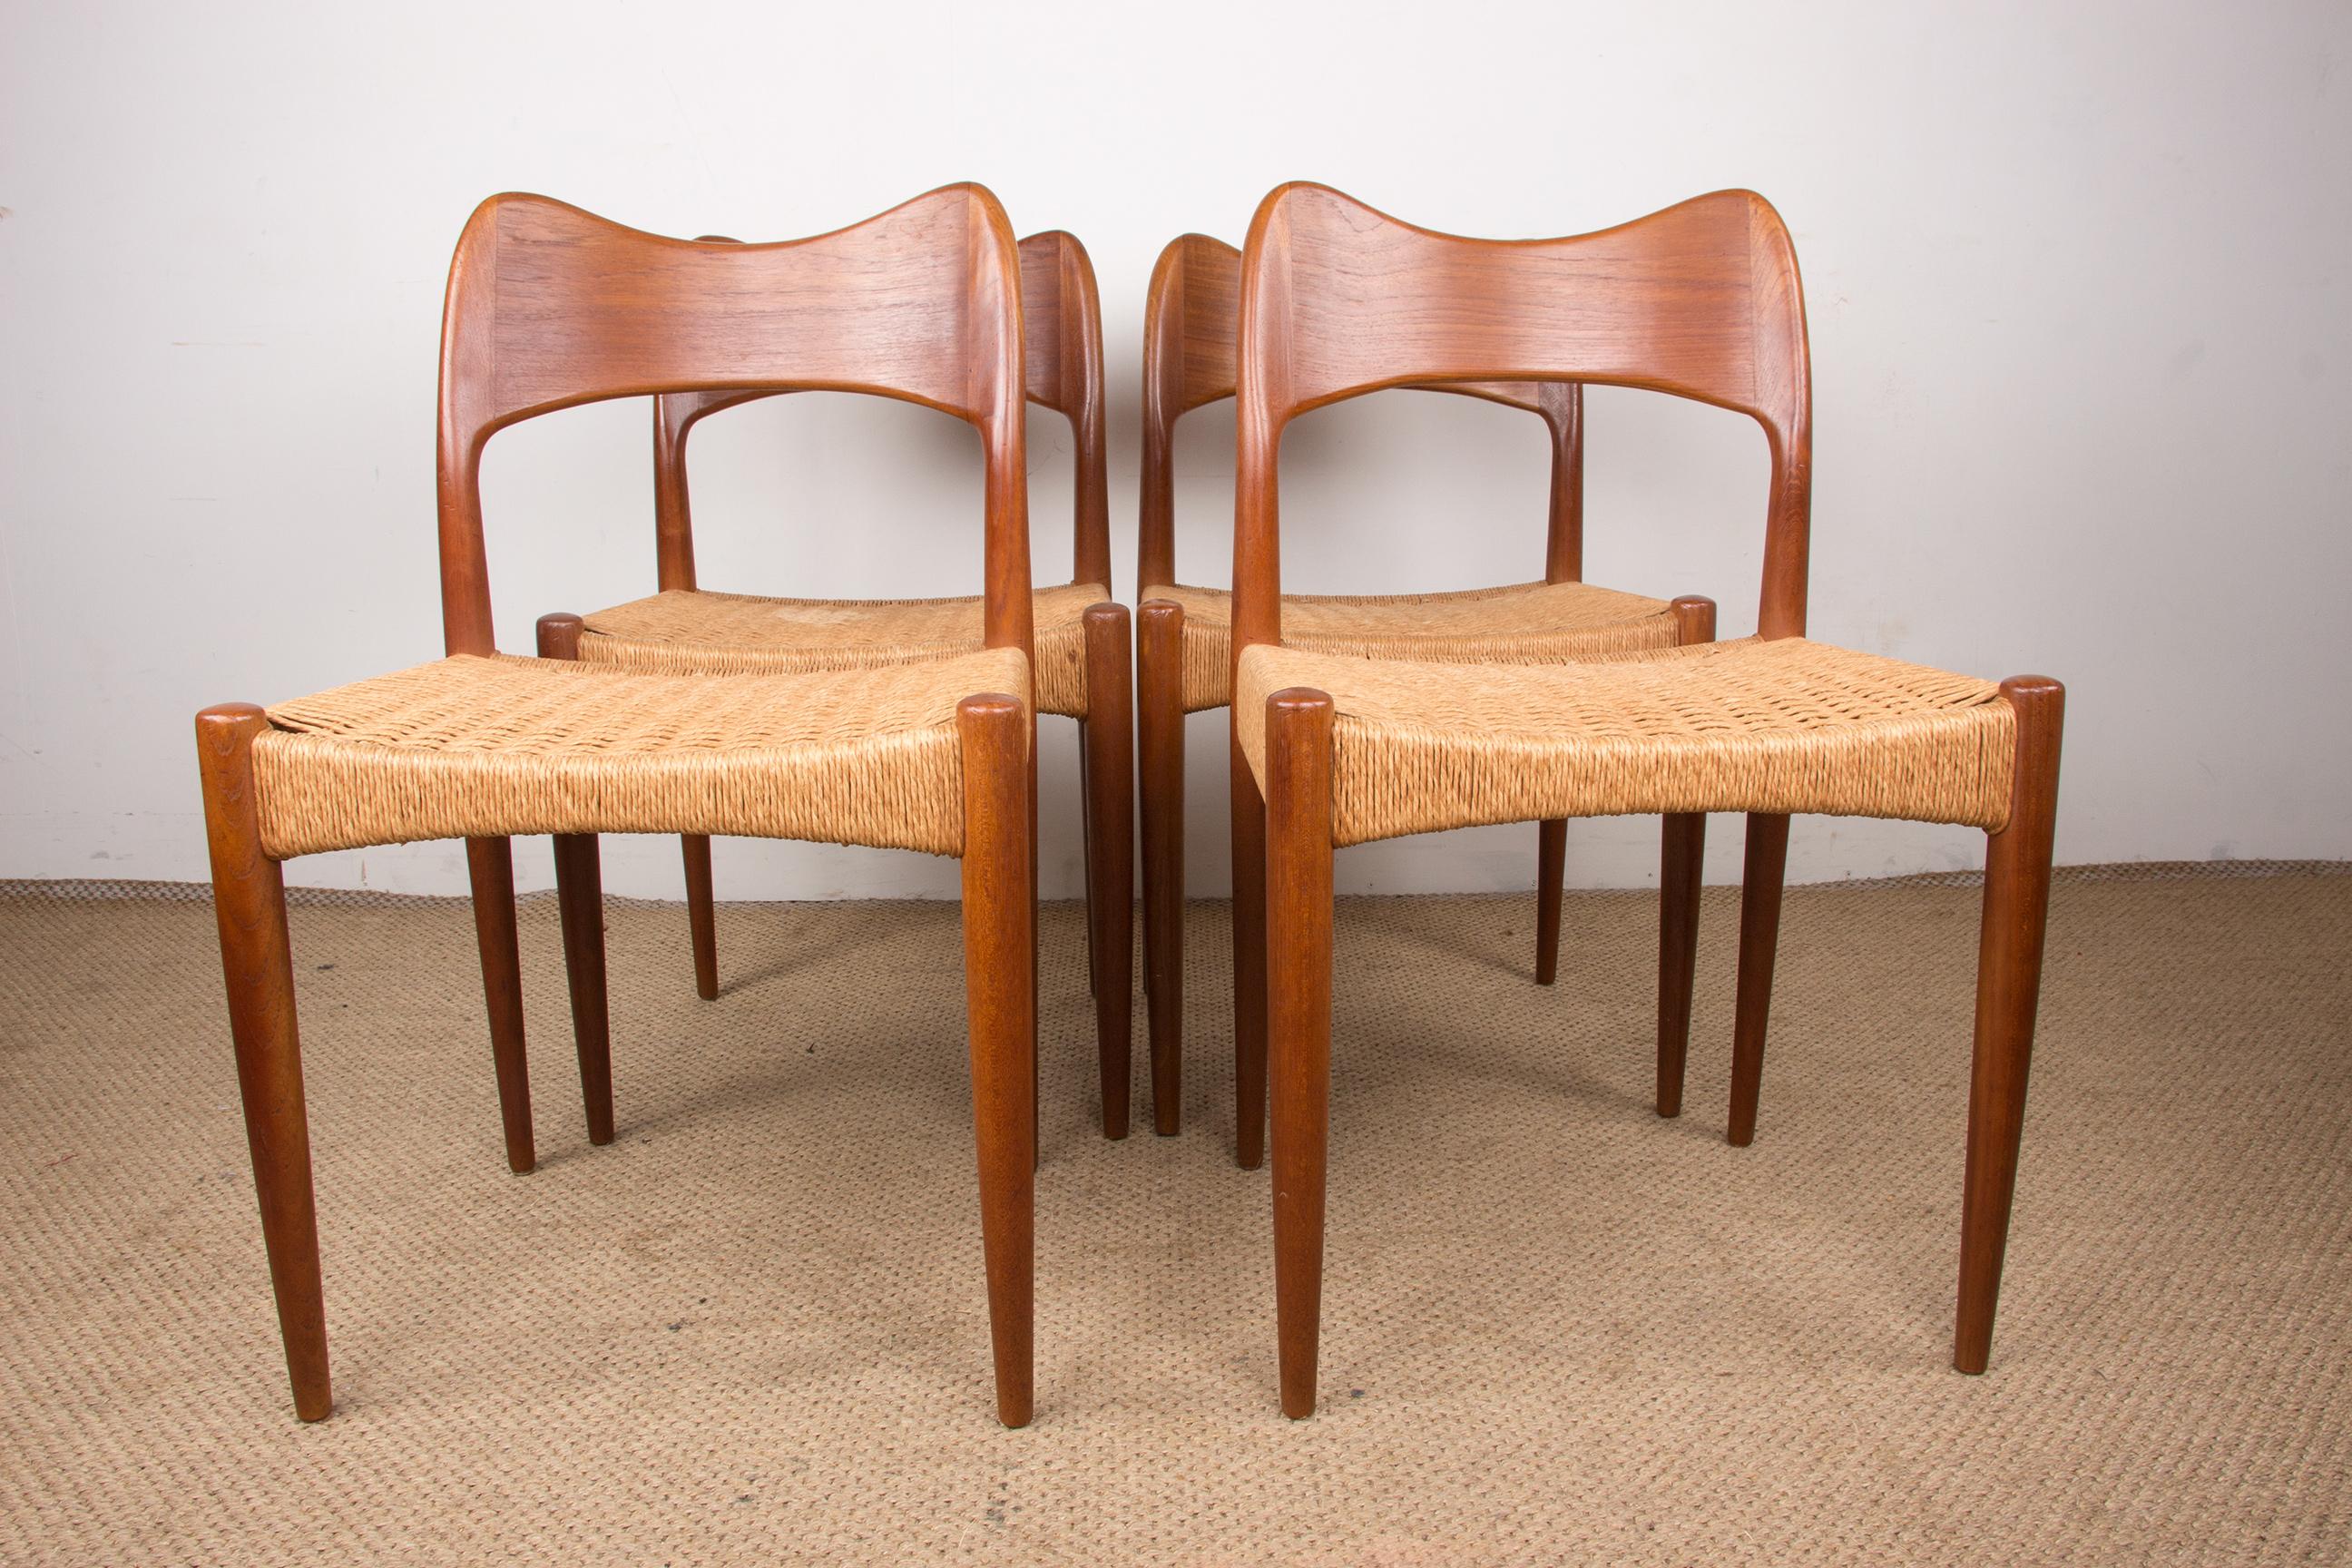 Series of 4 Danish Teak and Cordage chairs by Arne Hovmand Olsen 1960. For Sale 6